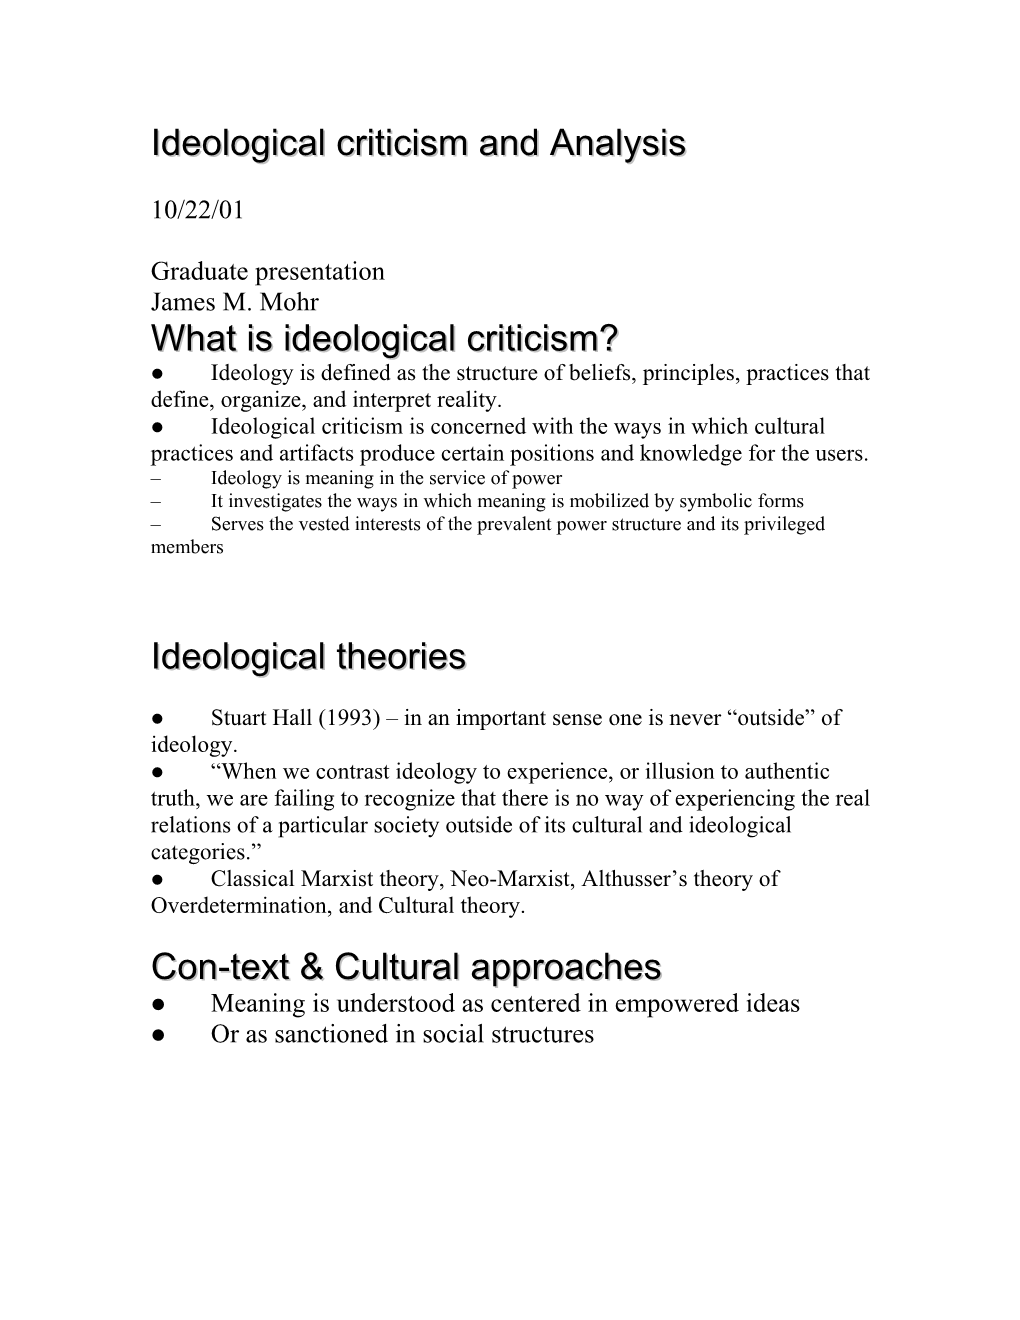 Ideological Criticism and Analysis